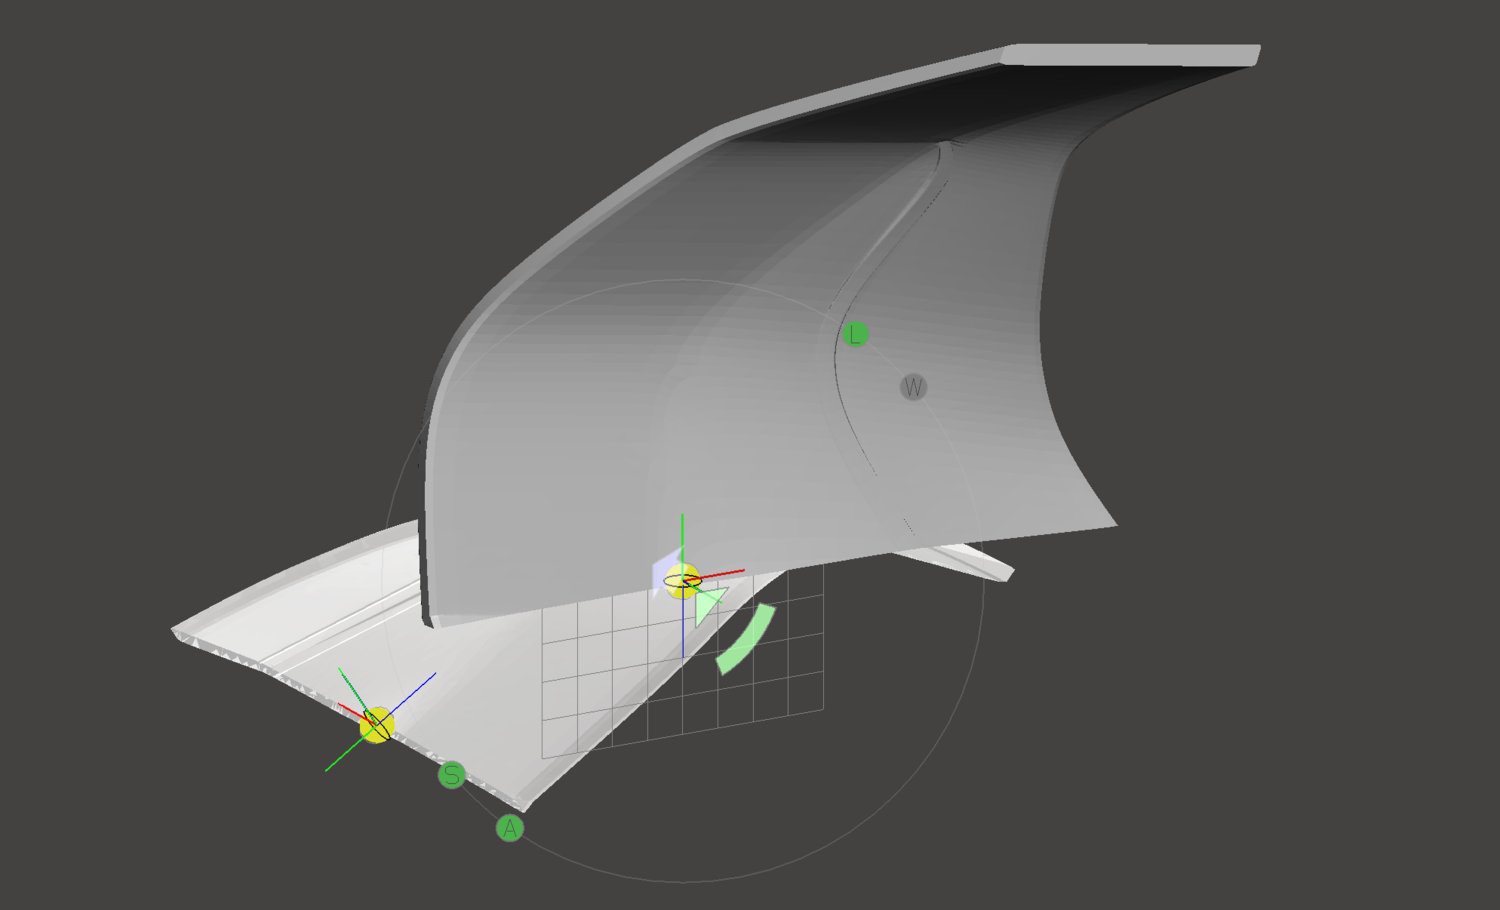 Screenshot of the 3D model during use of the align tool